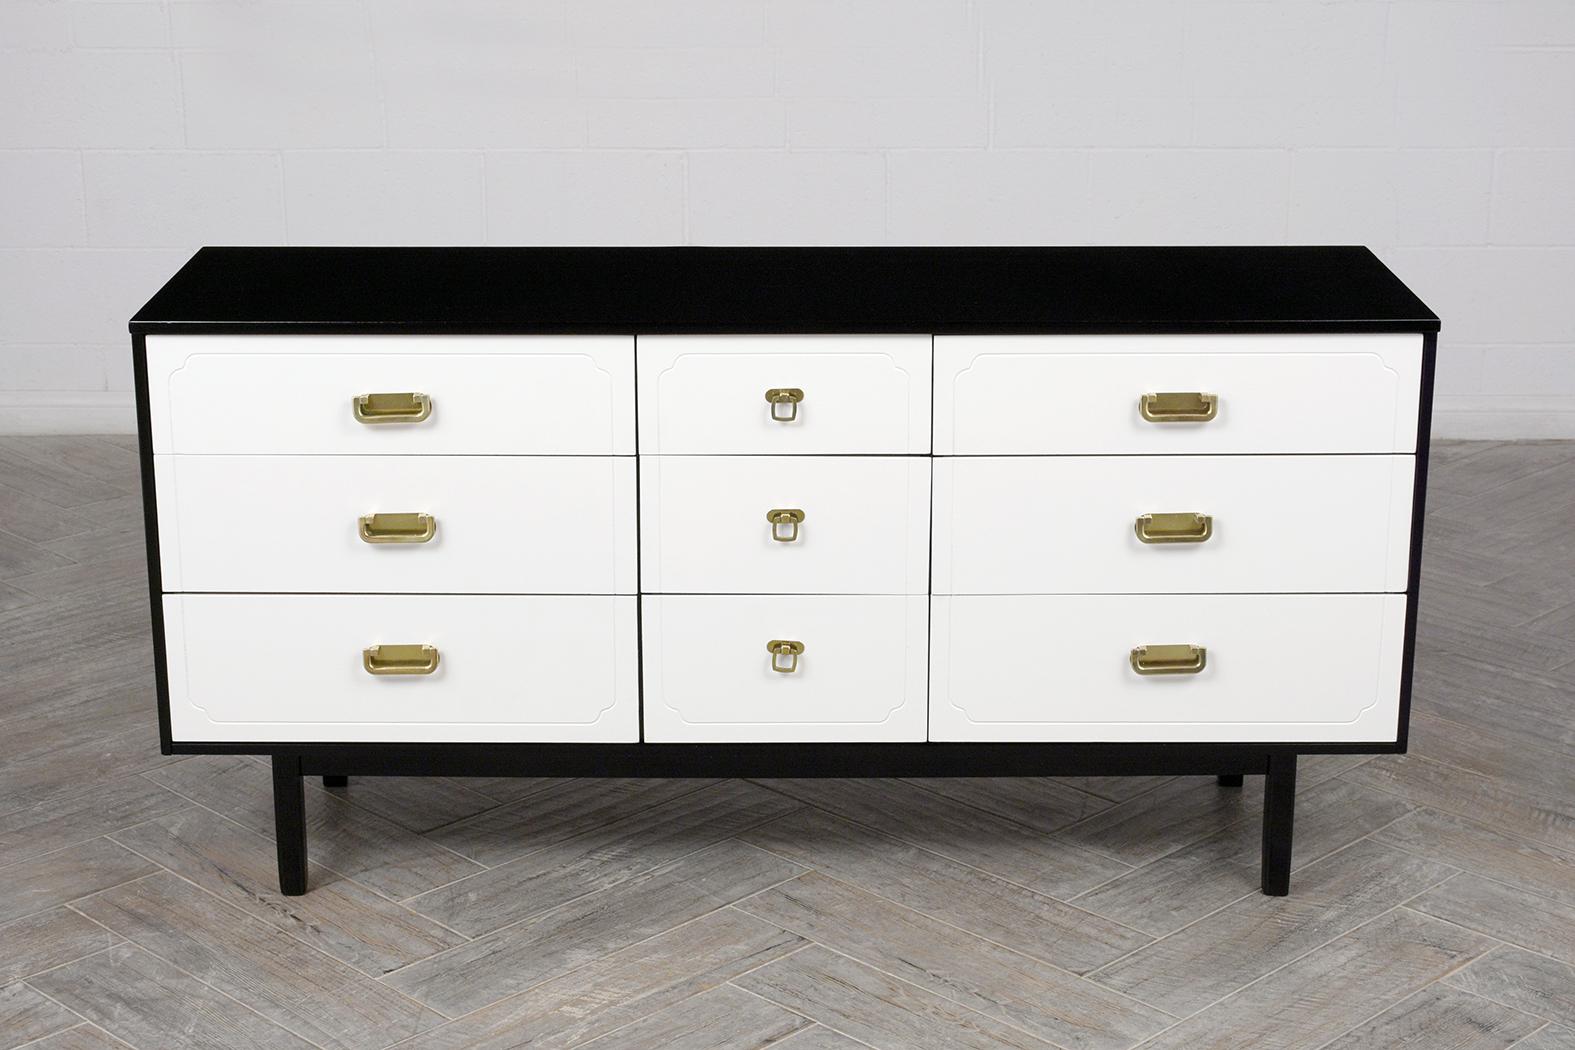 This 1960s Mid Century Modern Dresser has been fully restored is made from solid wood stained in a white & black color combination with a newly lacquered finish. The commode features nine drawers with brass polished pull handles, each side has three